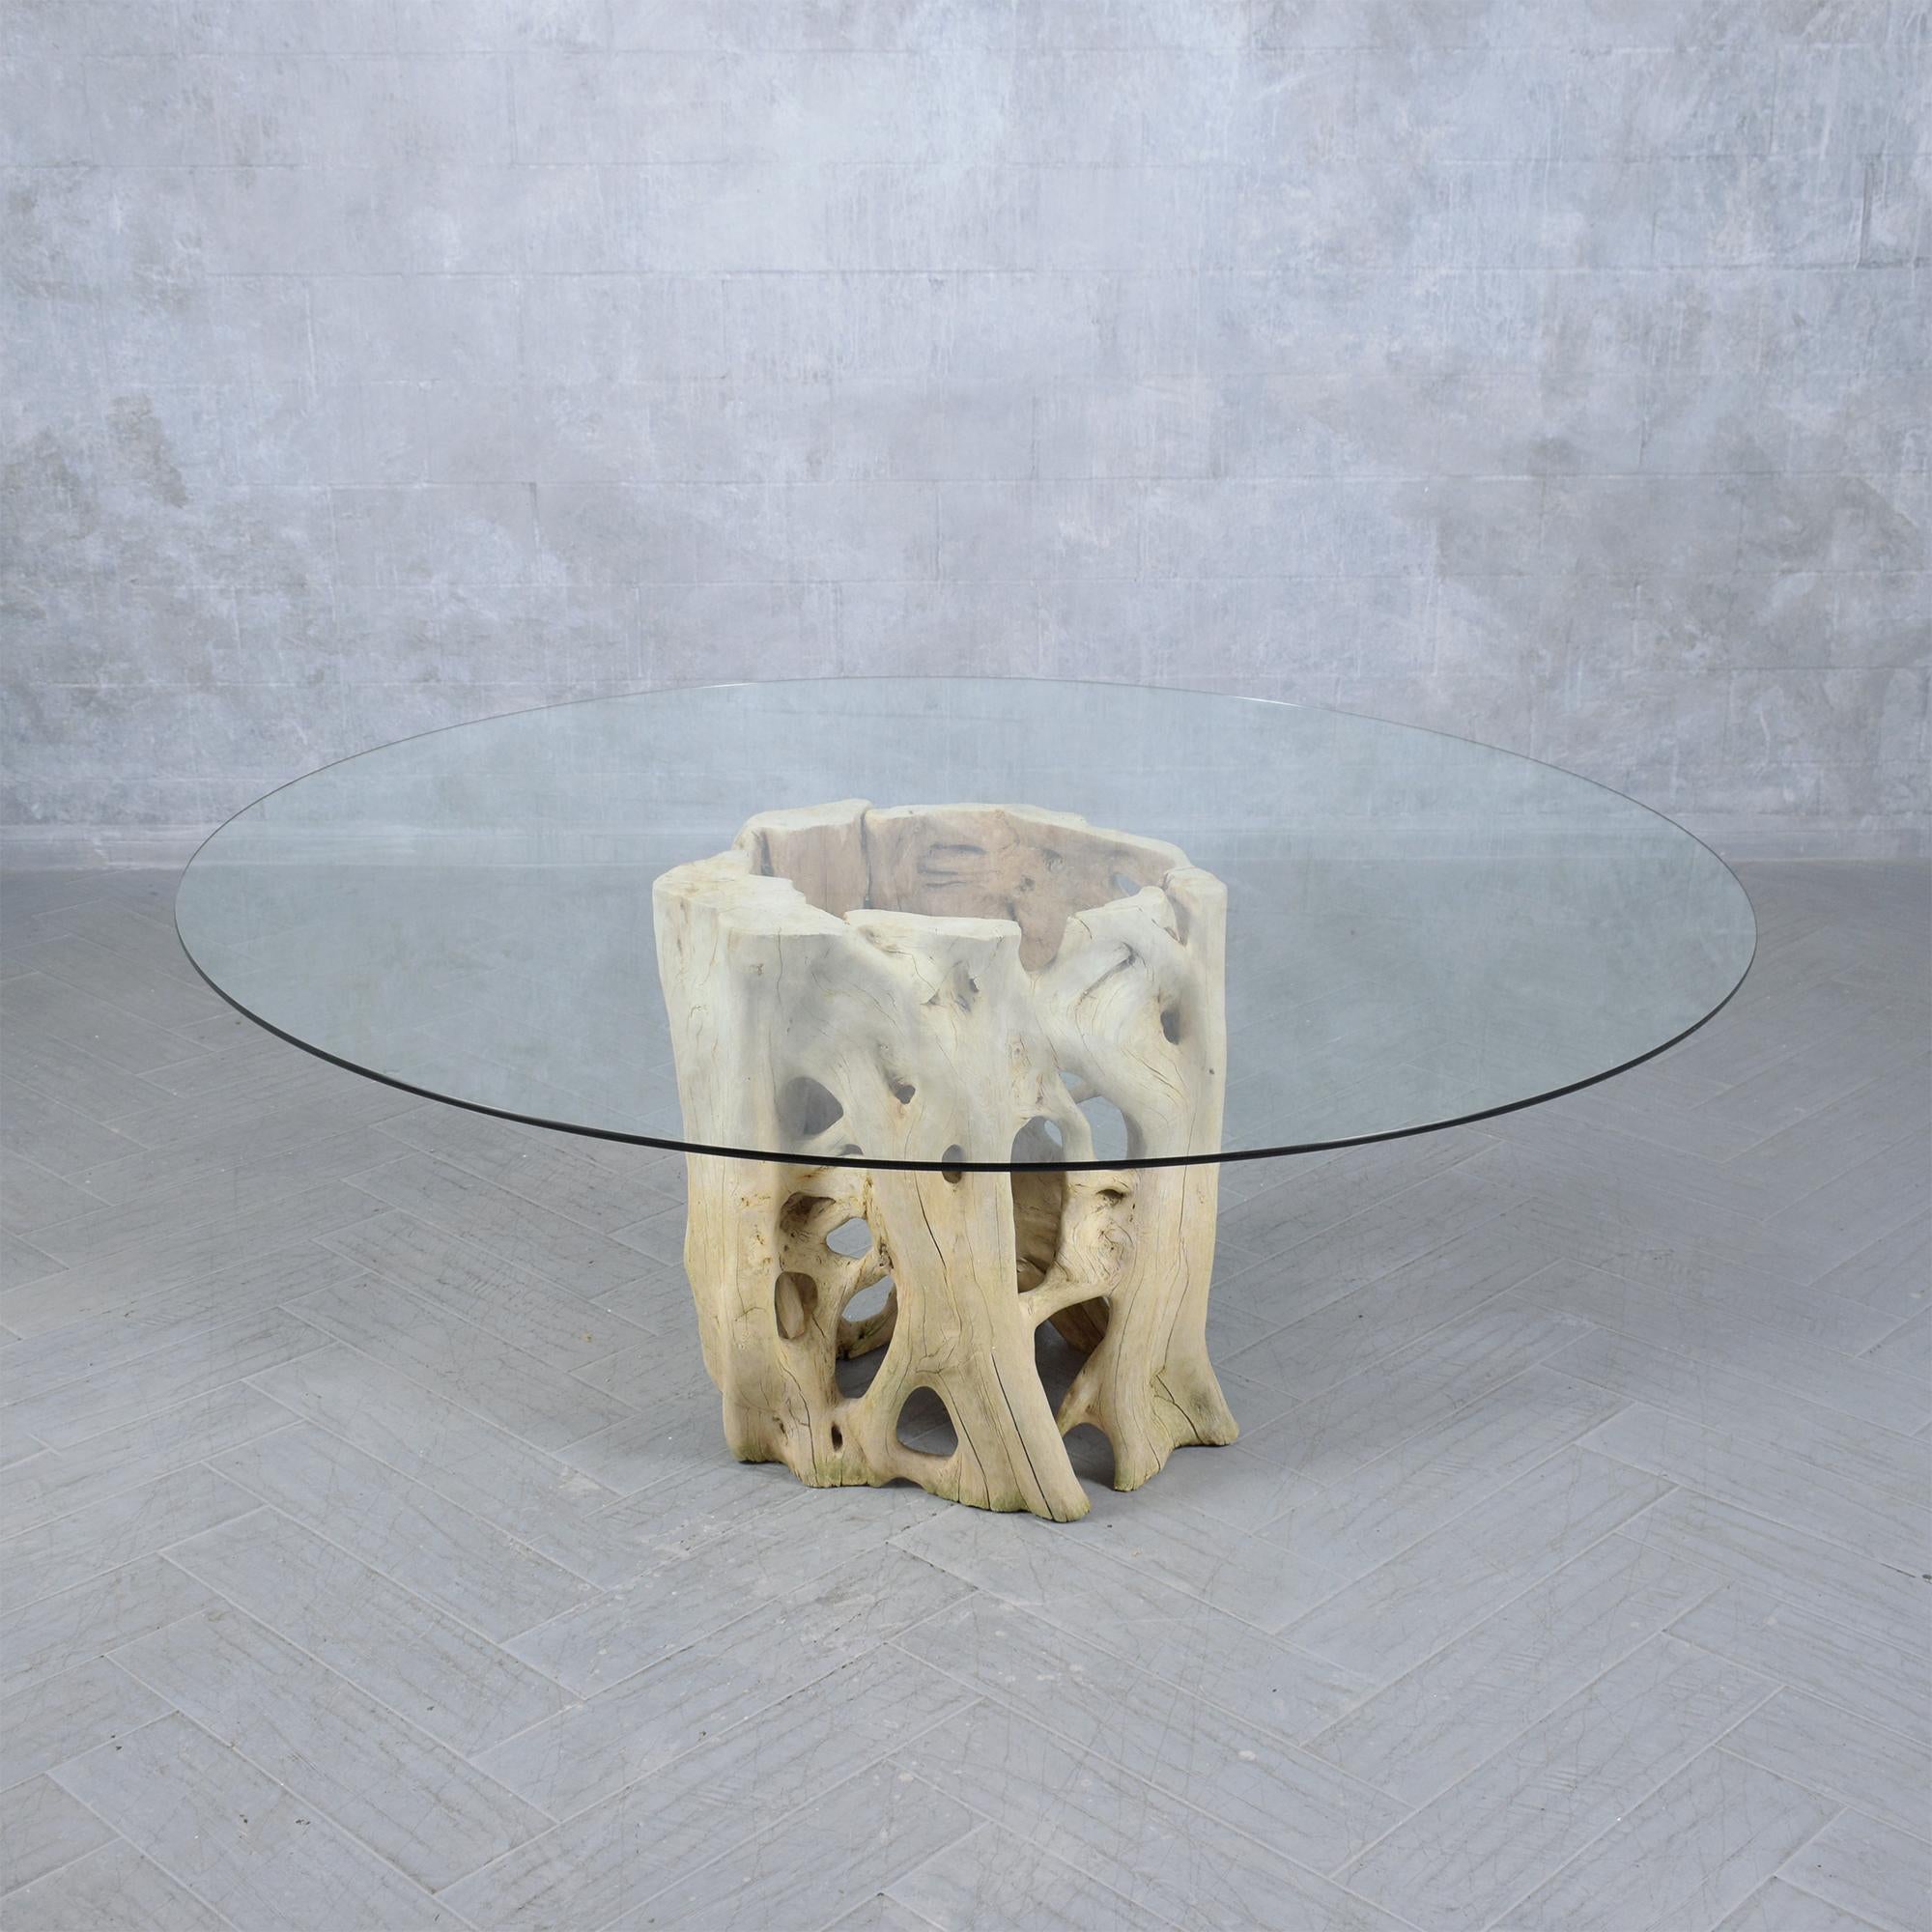 Immerse yourself in the unique beauty of nature combined with expert craftsmanship with our vintage root tree dining table. This one-of-a-kind piece is masterfully crafted from cypress wood, known for its durability and distinctive grain. The table